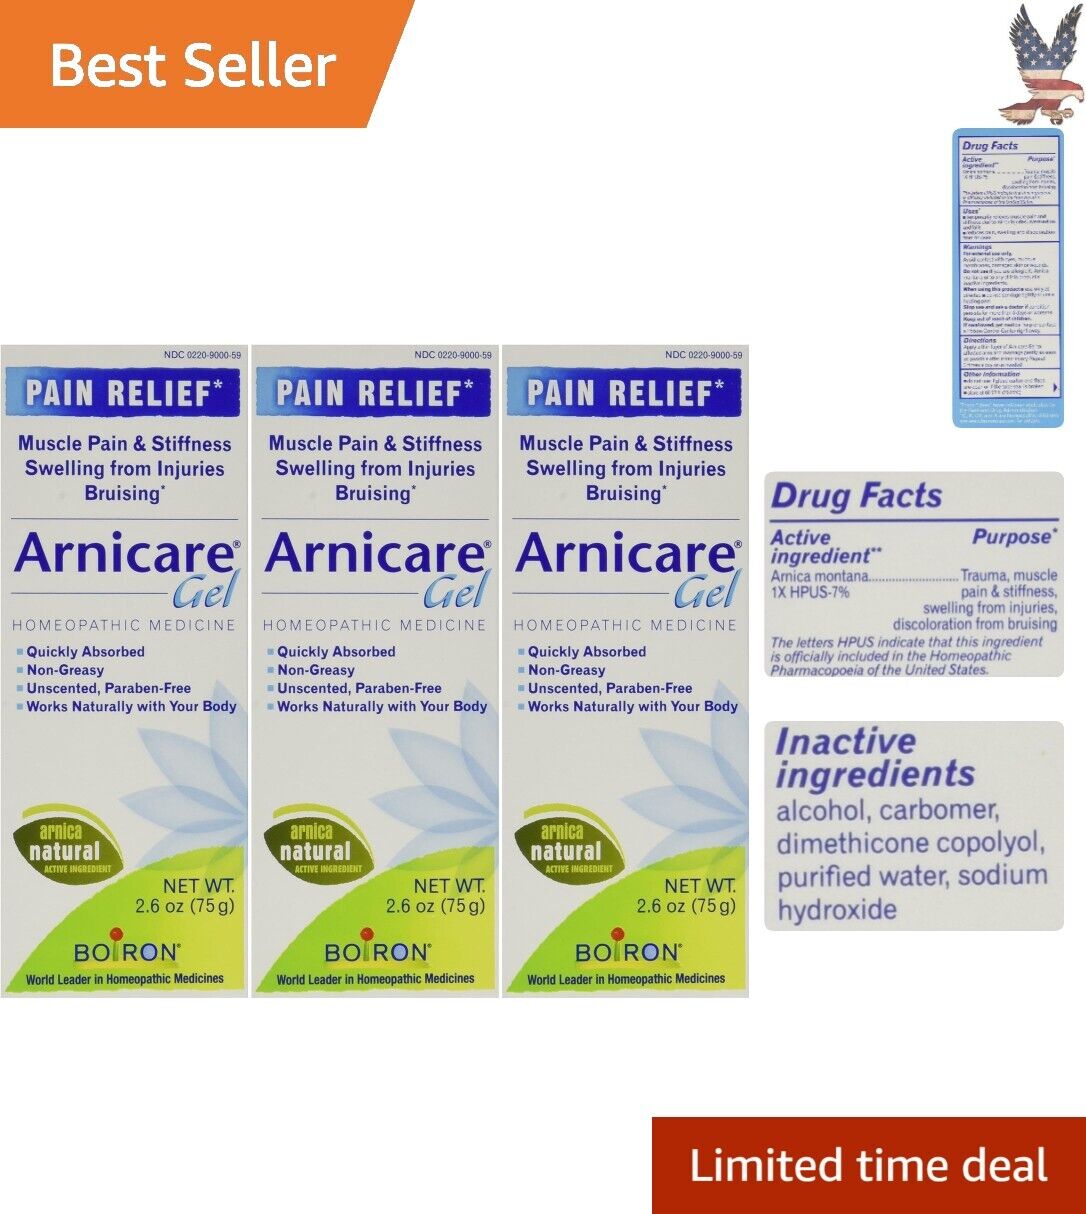 Arnica Gel - Unscented Natural 1X HPUS 7% - Relieves Pain - 2.6 oz Pack of 3